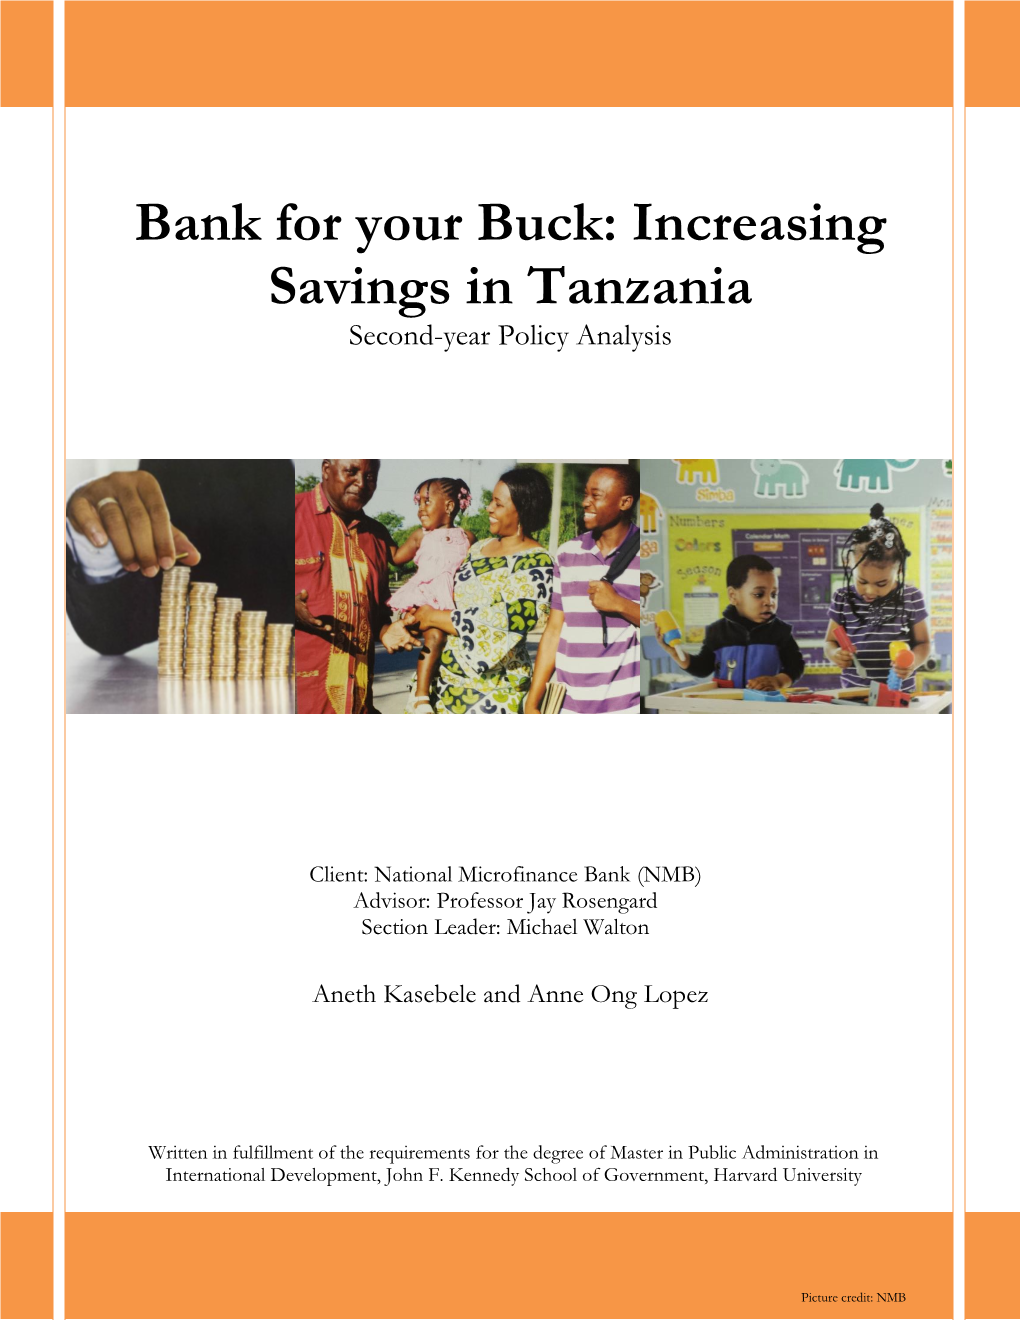 Bank for Your Buck: Increasing Savings in Tanzania Second-Year Policy Analysis